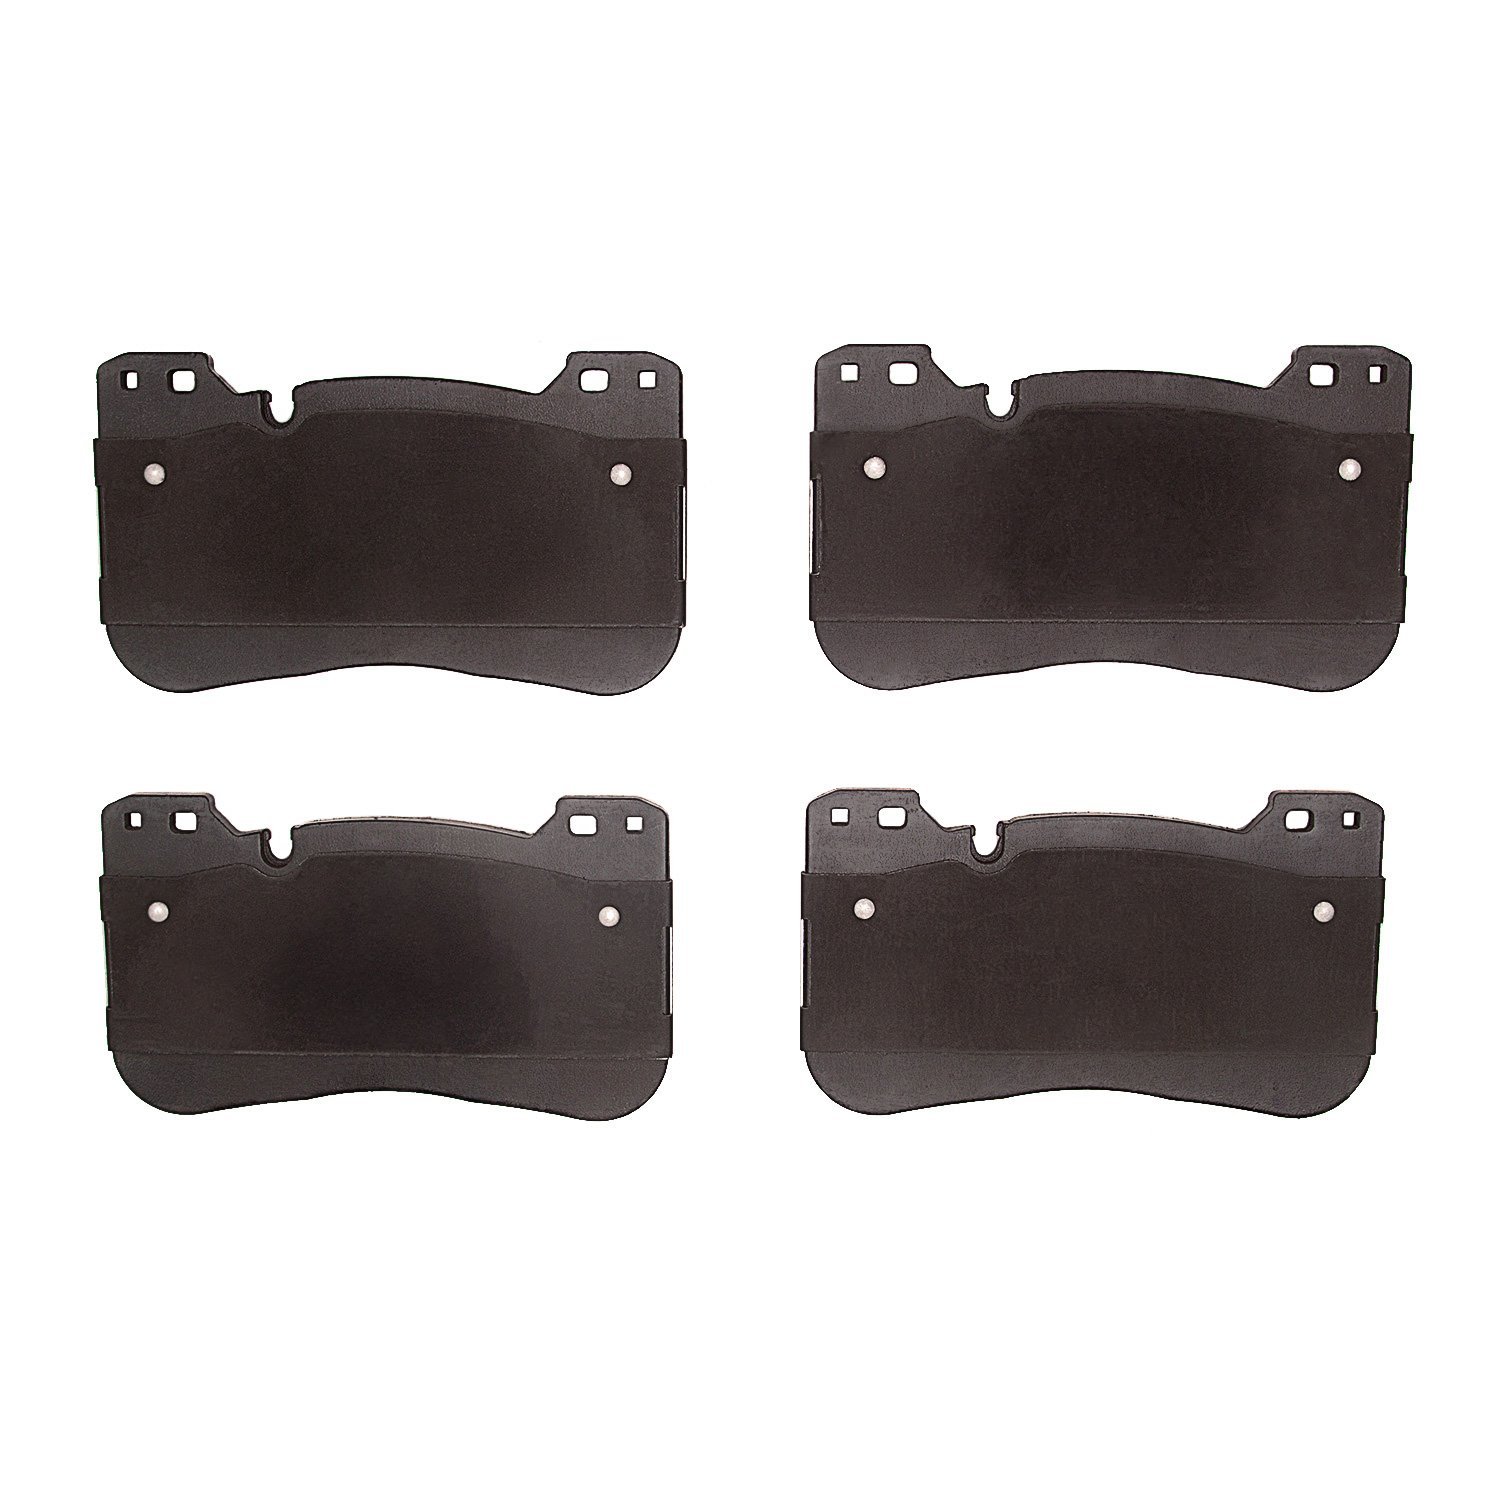 1552-2155-00 5000 Advanced Low-Metallic Brake Pads, Fits Select BMW, Position: Front